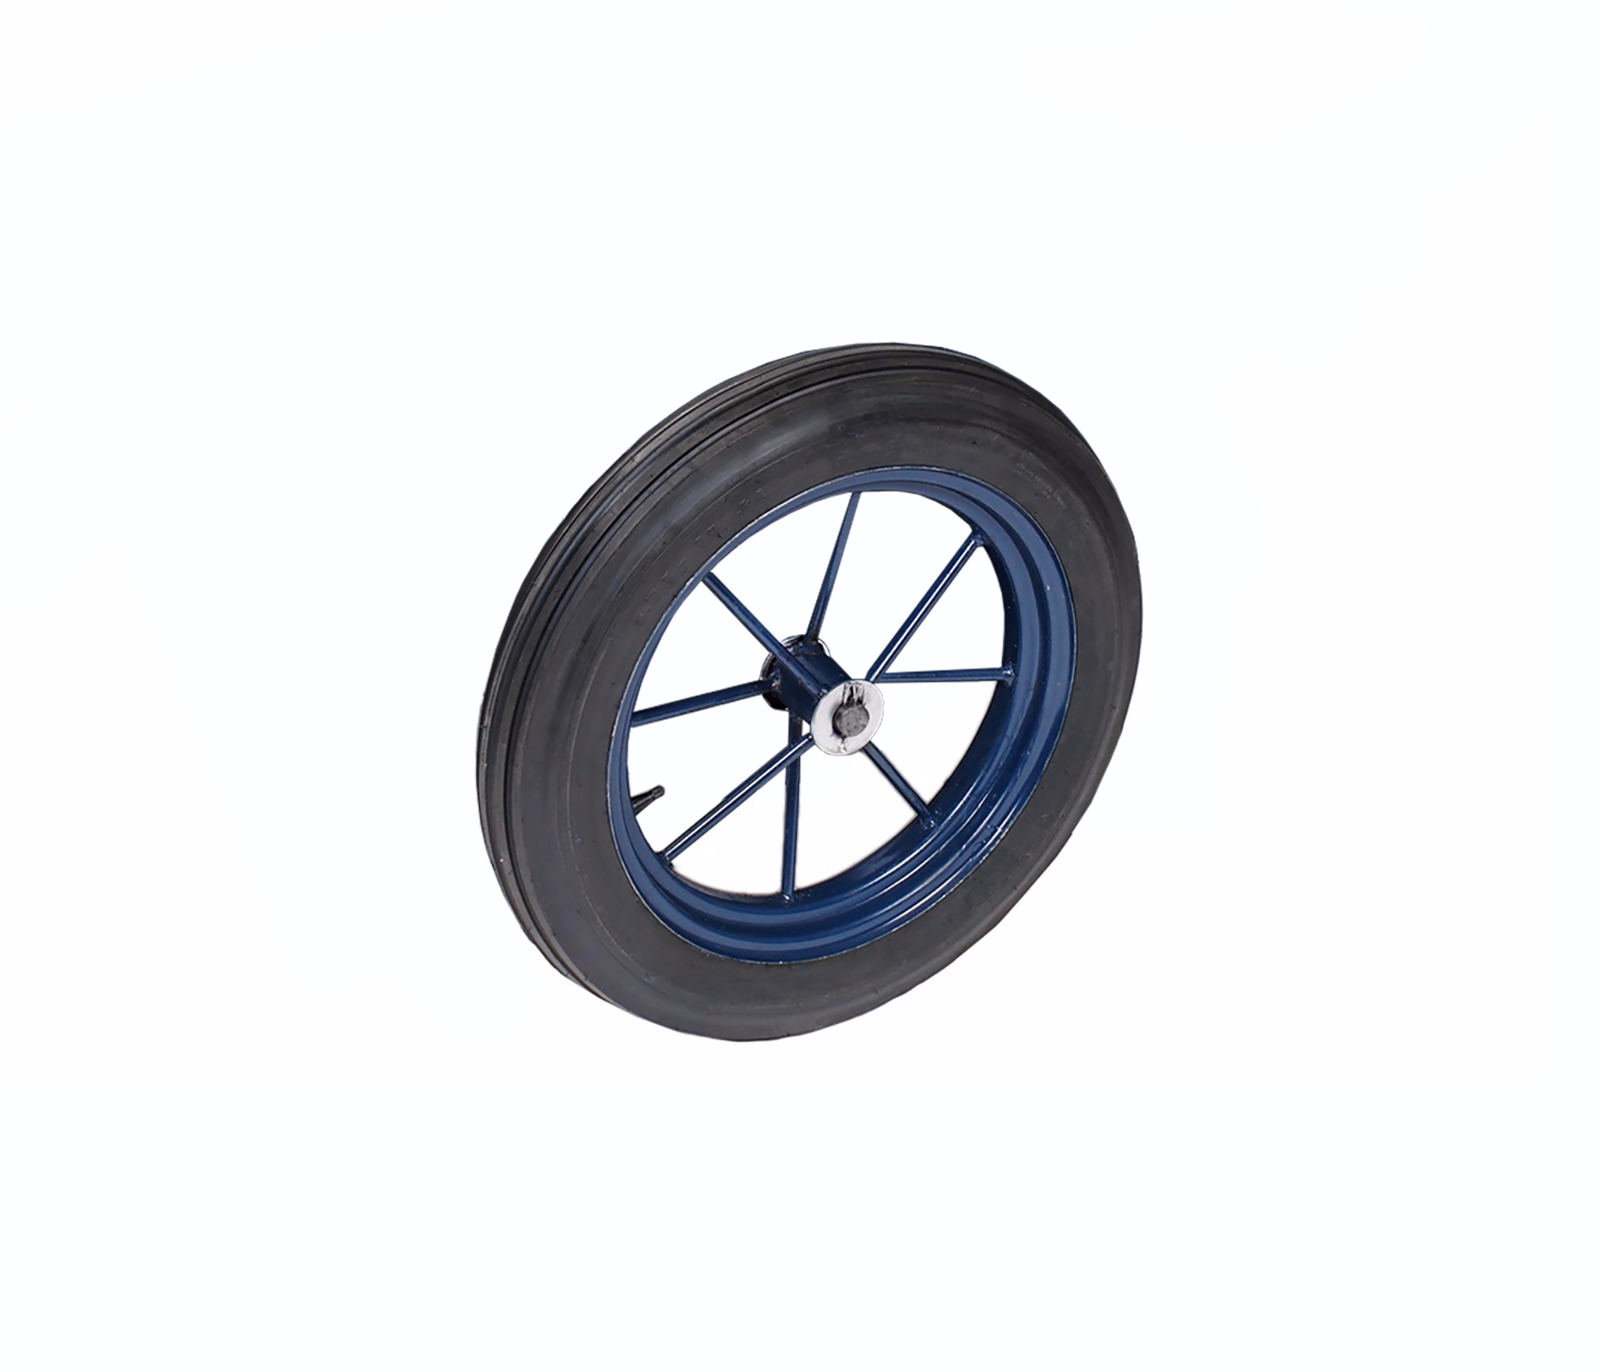 replacement pushchair wheels